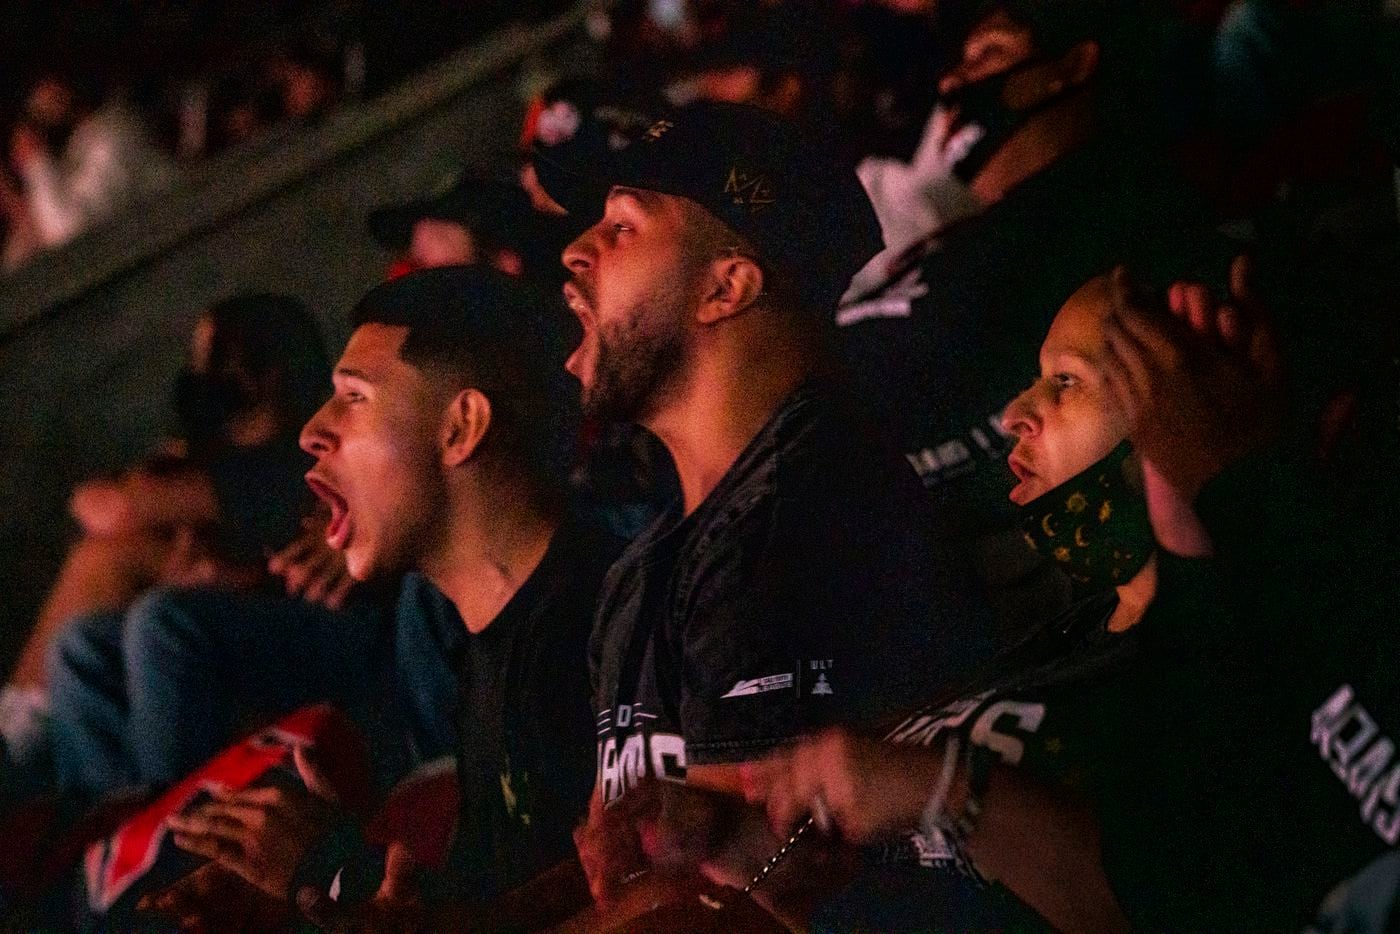 From left, Anthony “Shotzzy” Cuevas-Castro brothers Steven Quevedo, Gabriel Castro, and his mother Christina Hernandez cheer as they watch their Shotzzy compete during the winners final of the Call of Duty league playoffs at the Galen Center on Saturday, August 21, 2021 in Los Angeles, California. The Empire lost to FaZe 0 - 3 in their first match of the day but are still in contention to play in the finals through the elimination finals. (Justin L. Stewart/Special Contributor)